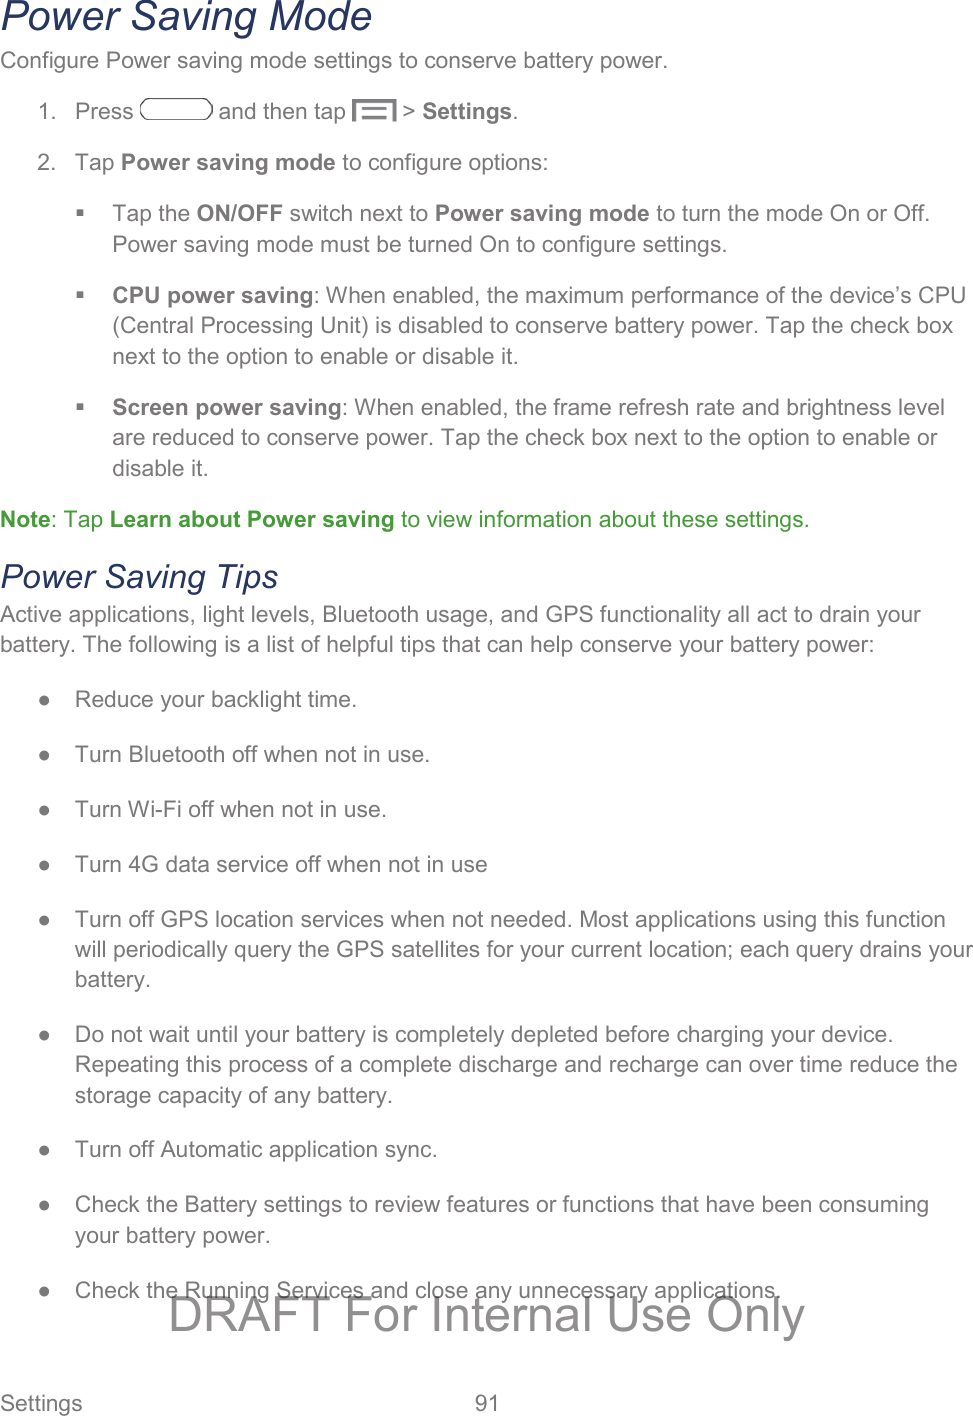  Settings  91   Power Saving Mode Configure Power saving mode settings to conserve battery power. 1.  Press   and then tap   &gt; Settings. 2. Tap Power saving mode to configure options:  Tap the ON/OFF switch next to Power saving mode to turn the mode On or Off. Power saving mode must be turned On to configure settings.  CPU power saving: When enabled, the maximum performance of the device’s CPU (Central Processing Unit) is disabled to conserve battery power. Tap the check box next to the option to enable or disable it.  Screen power saving: When enabled, the frame refresh rate and brightness level are reduced to conserve power. Tap the check box next to the option to enable or disable it. Note: Tap Learn about Power saving to view information about these settings. Power Saving Tips Active applications, light levels, Bluetooth usage, and GPS functionality all act to drain your battery. The following is a list of helpful tips that can help conserve your battery power: ●  Reduce your backlight time.  ●  Turn Bluetooth off when not in use. ●  Turn Wi-Fi off when not in use.  ●  Turn 4G data service off when not in use ●  Turn off GPS location services when not needed. Most applications using this function will periodically query the GPS satellites for your current location; each query drains your battery. ●  Do not wait until your battery is completely depleted before charging your device. Repeating this process of a complete discharge and recharge can over time reduce the storage capacity of any battery.  ●  Turn off Automatic application sync. ●  Check the Battery settings to review features or functions that have been consuming your battery power.  ●  Check the Running Services and close any unnecessary applications. DRAFT For Internal Use Only